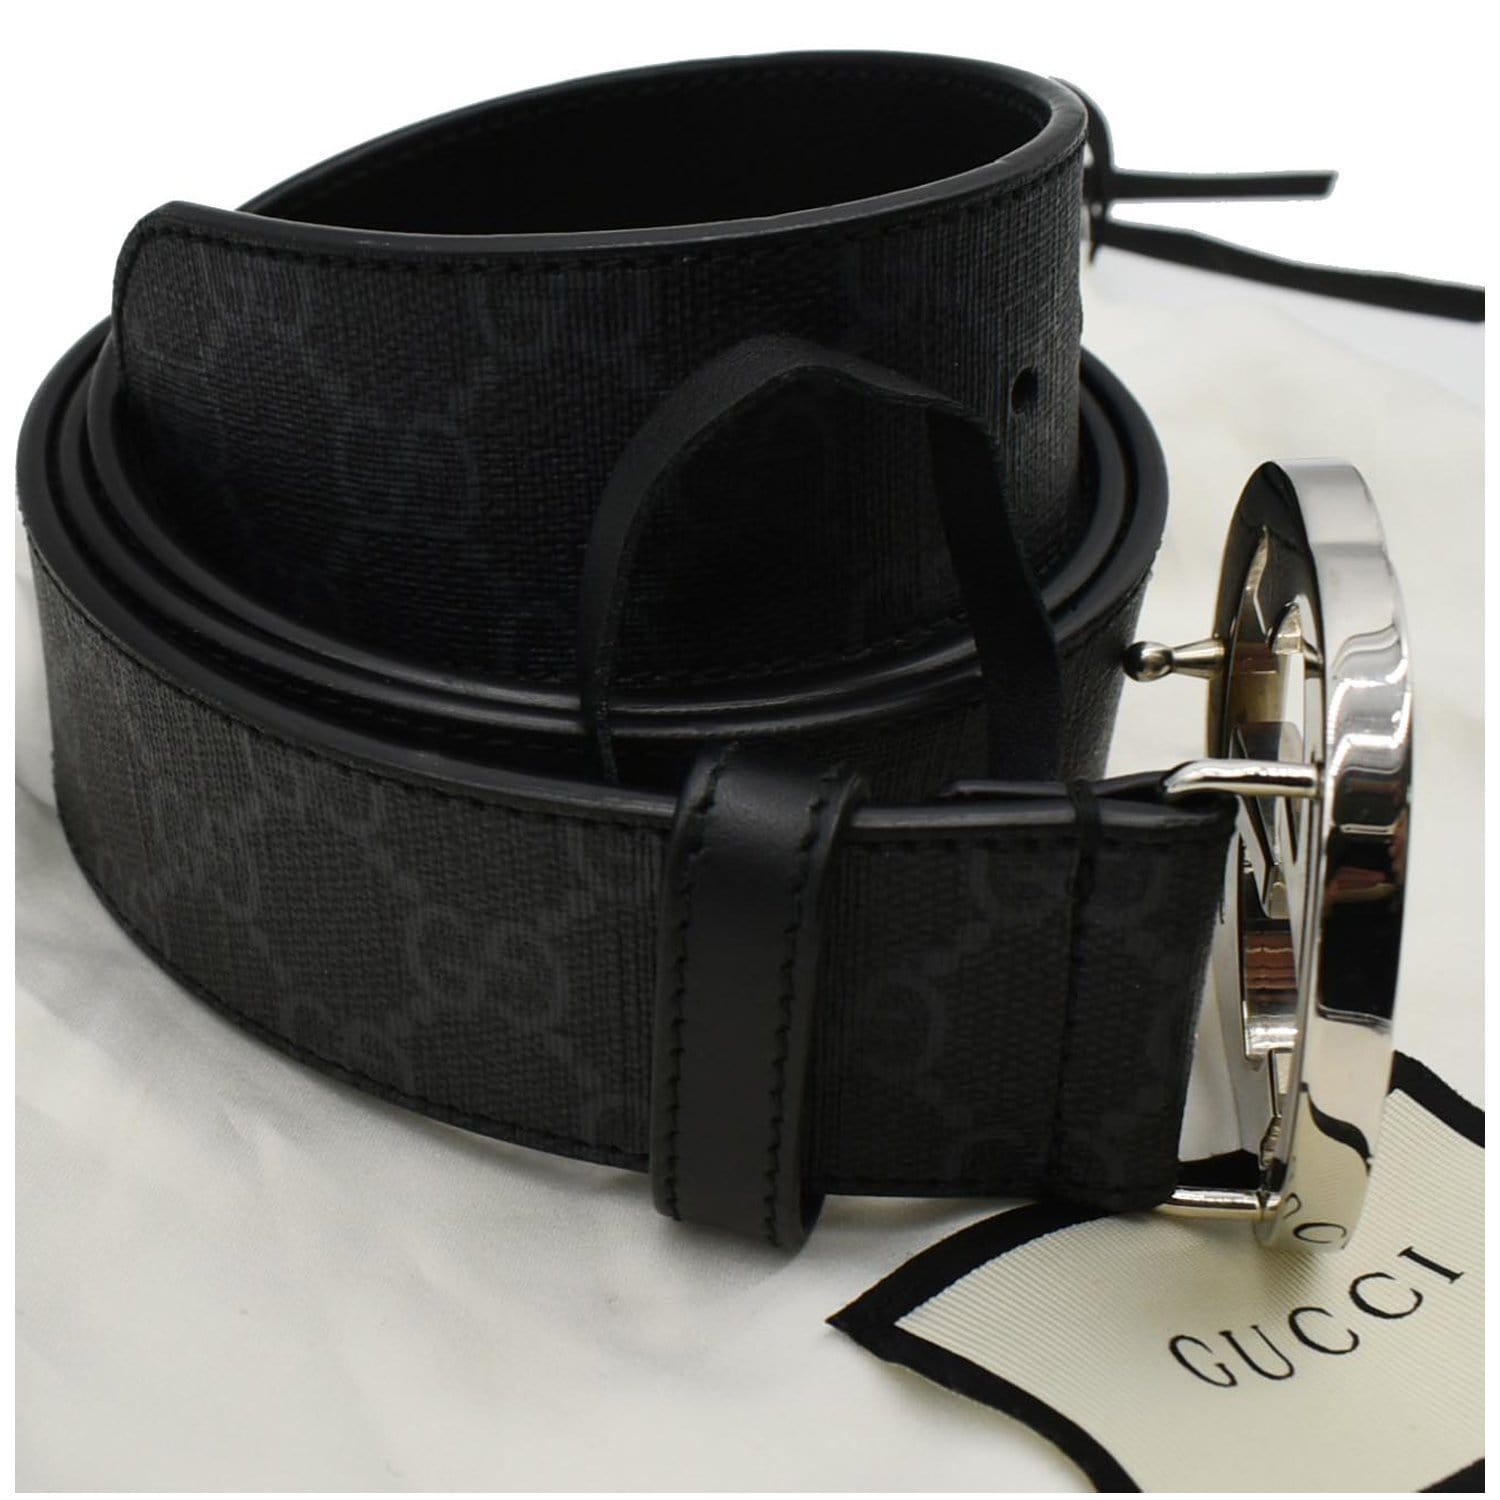 Gucci Men's GG Supreme Belt with G Buckle